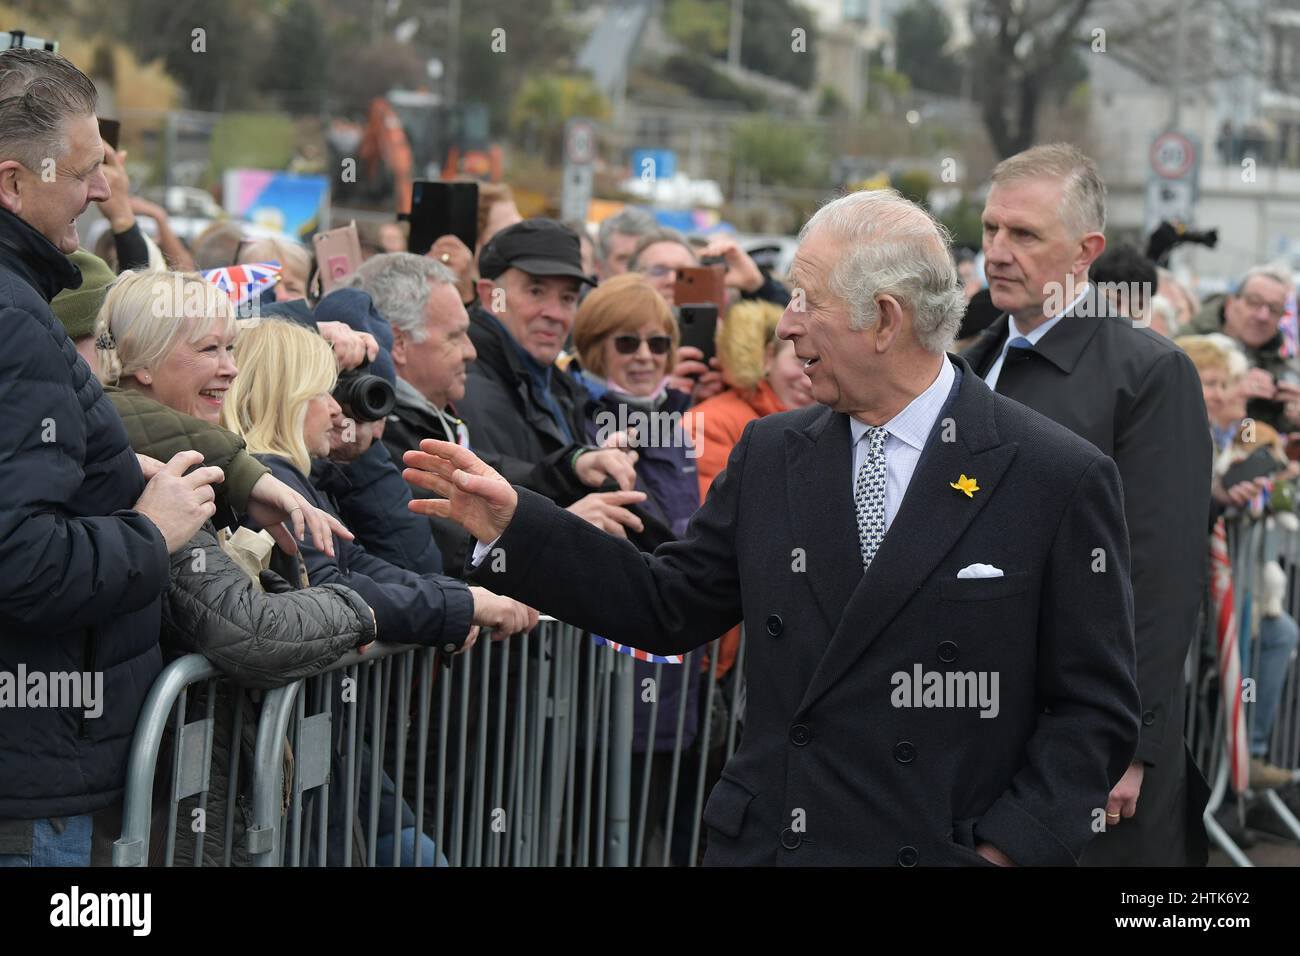 City of Southend-on-Sea Essex UK 1st March 2022. Prince Charles and Camilla  Duchess of Cornwall visit Southend Pier as part of a visit to commemorate  Southend-on-Sea in Essex achieving City status. The